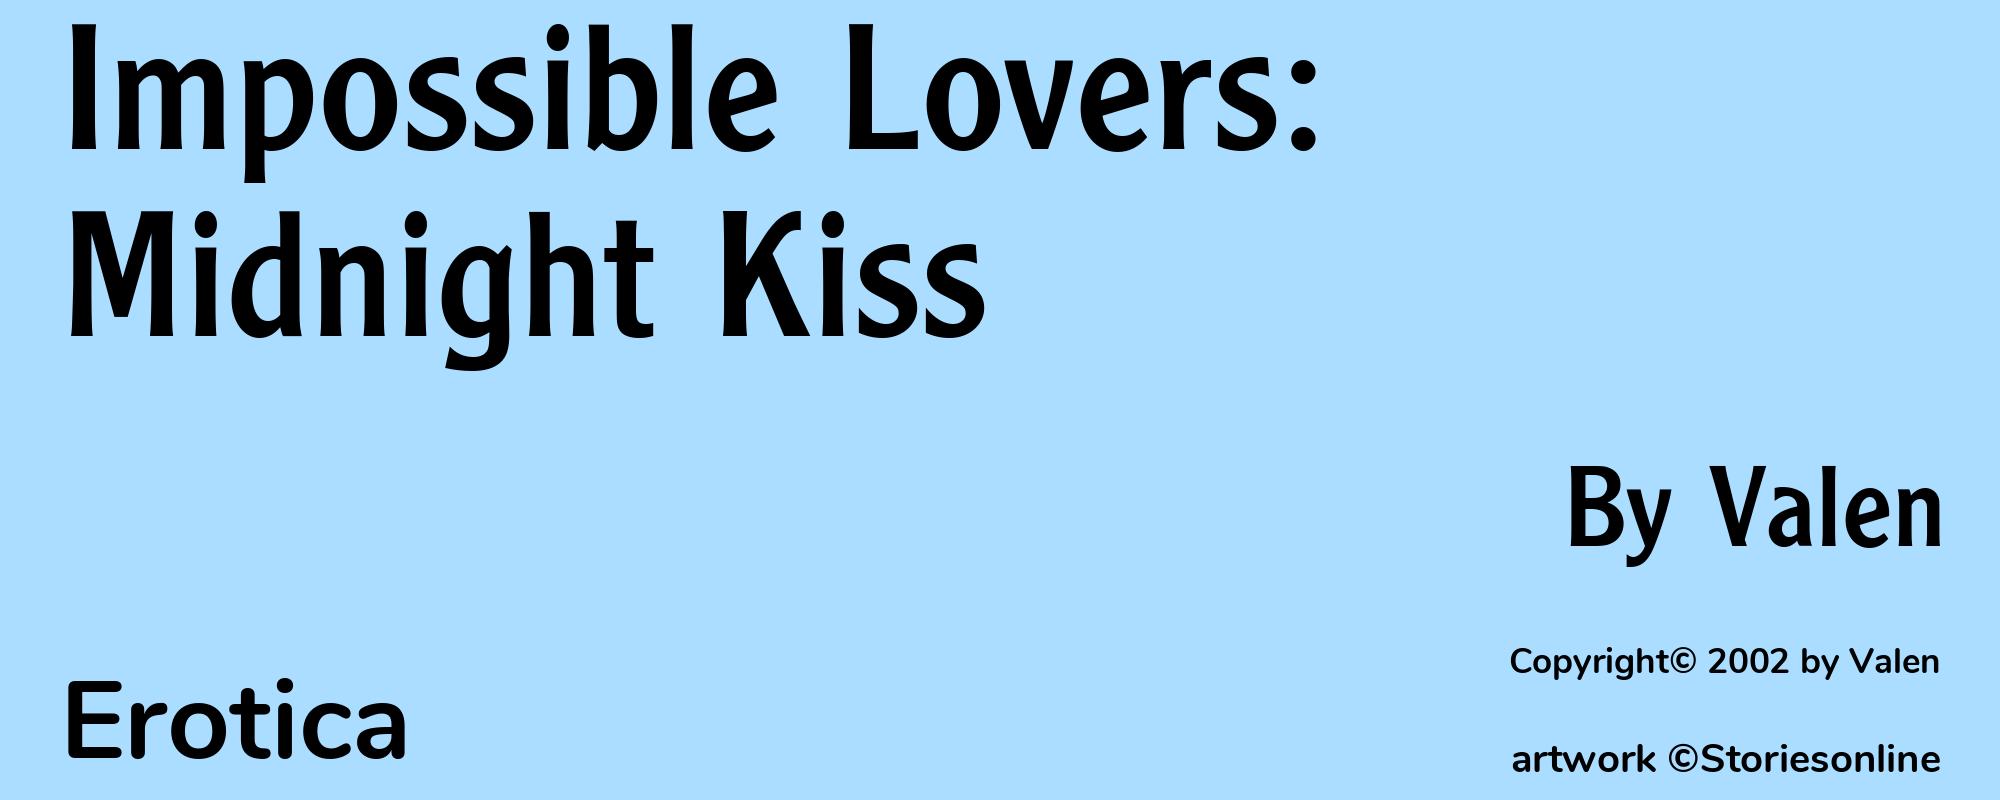 Impossible Lovers: Midnight Kiss - Cover